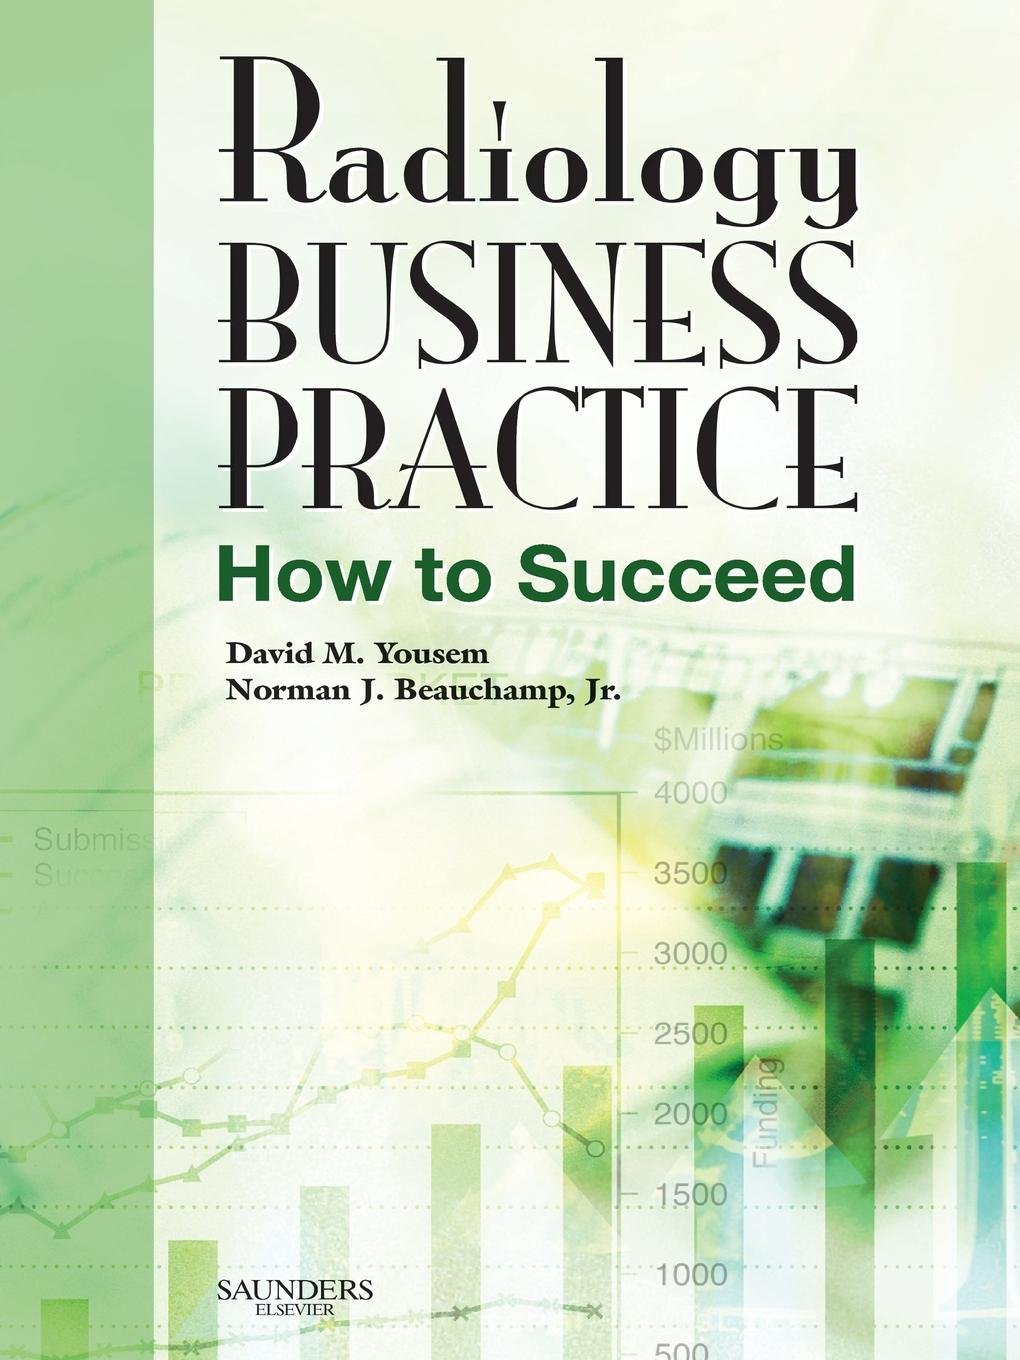 Radiology Business Practice: How to Succeed